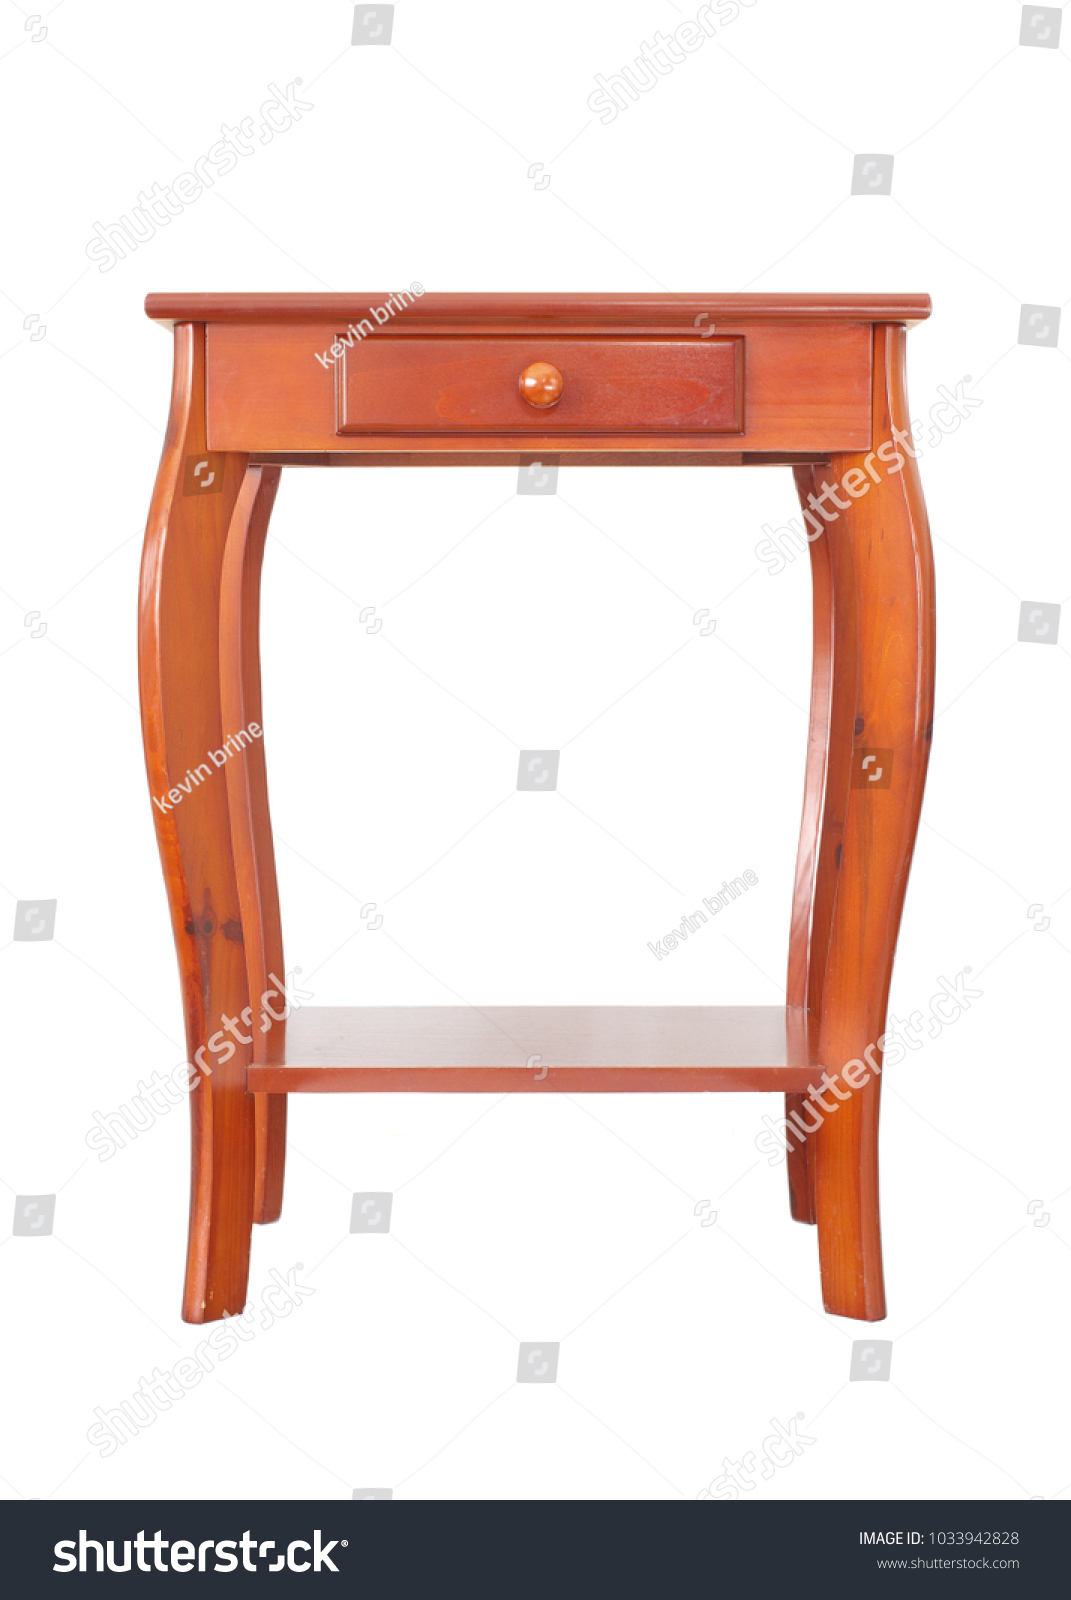 Rich color wood end table isolated on white. #1033942828